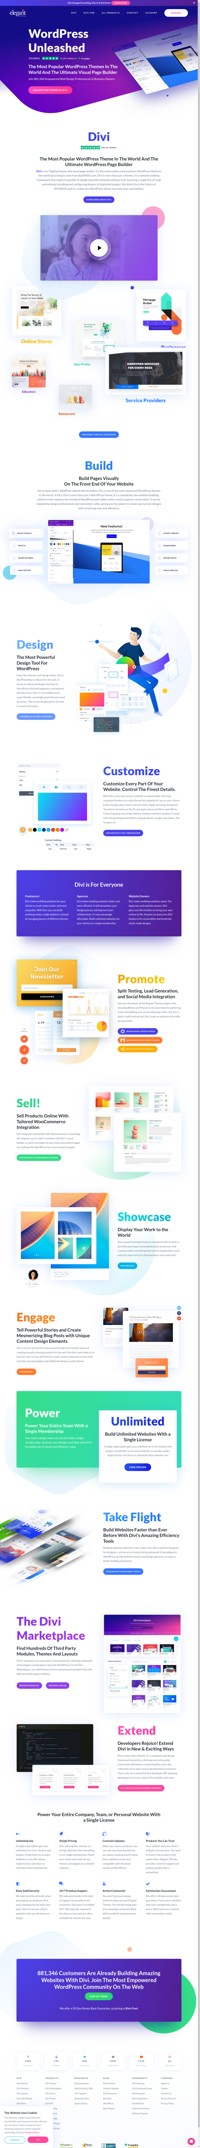 WordPress Themes with Visual Drag & Drop Technology that empower a community of 881,346 customers. Home of Divi, the ultimate Visual Page Builder and Theme.